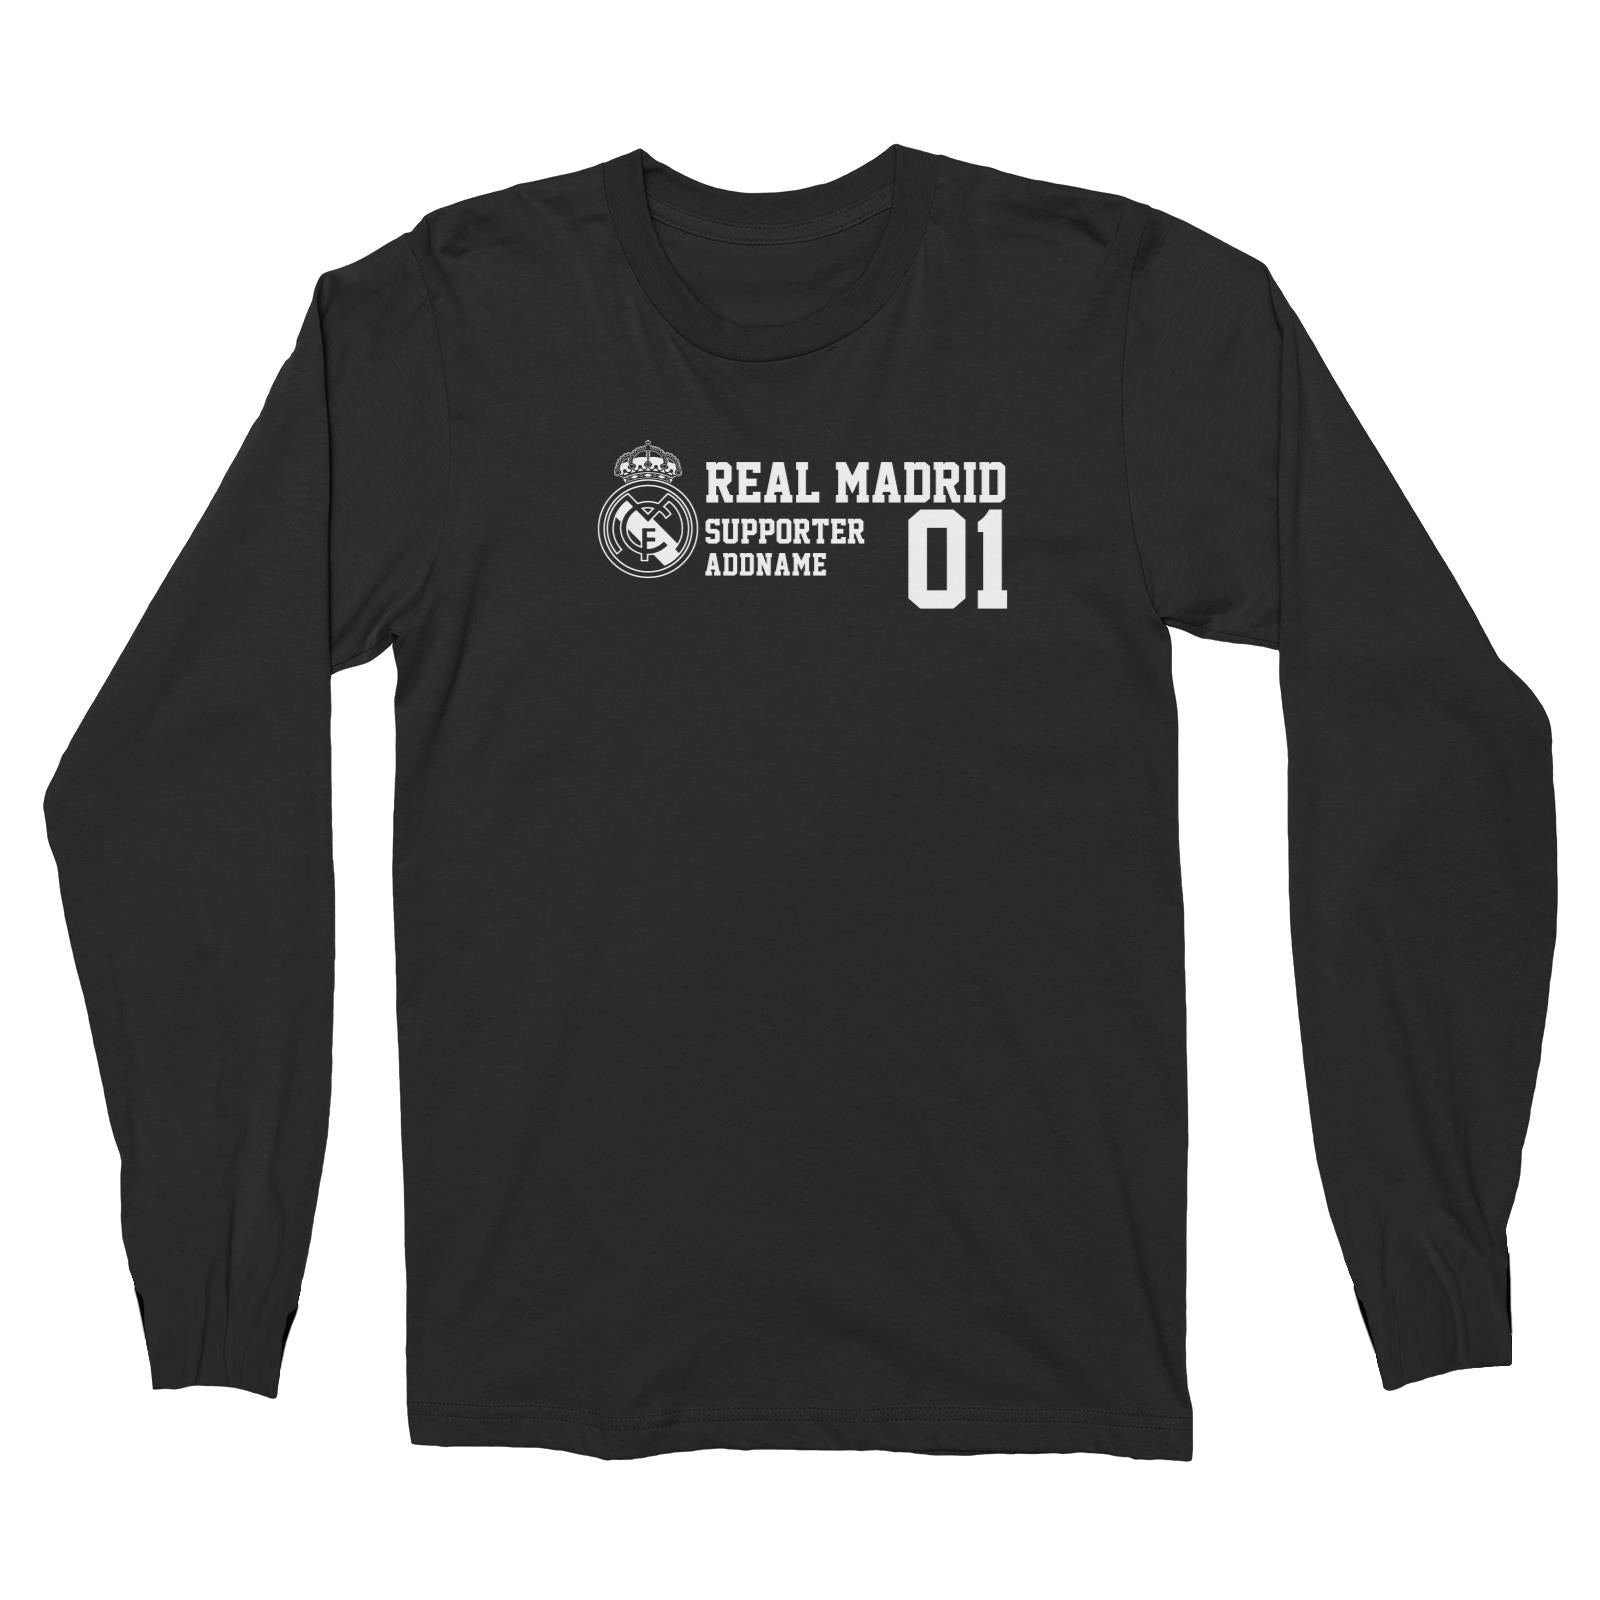 Real Madrid Football Supporter Addname Long Sleeve Unisex T-Shirt